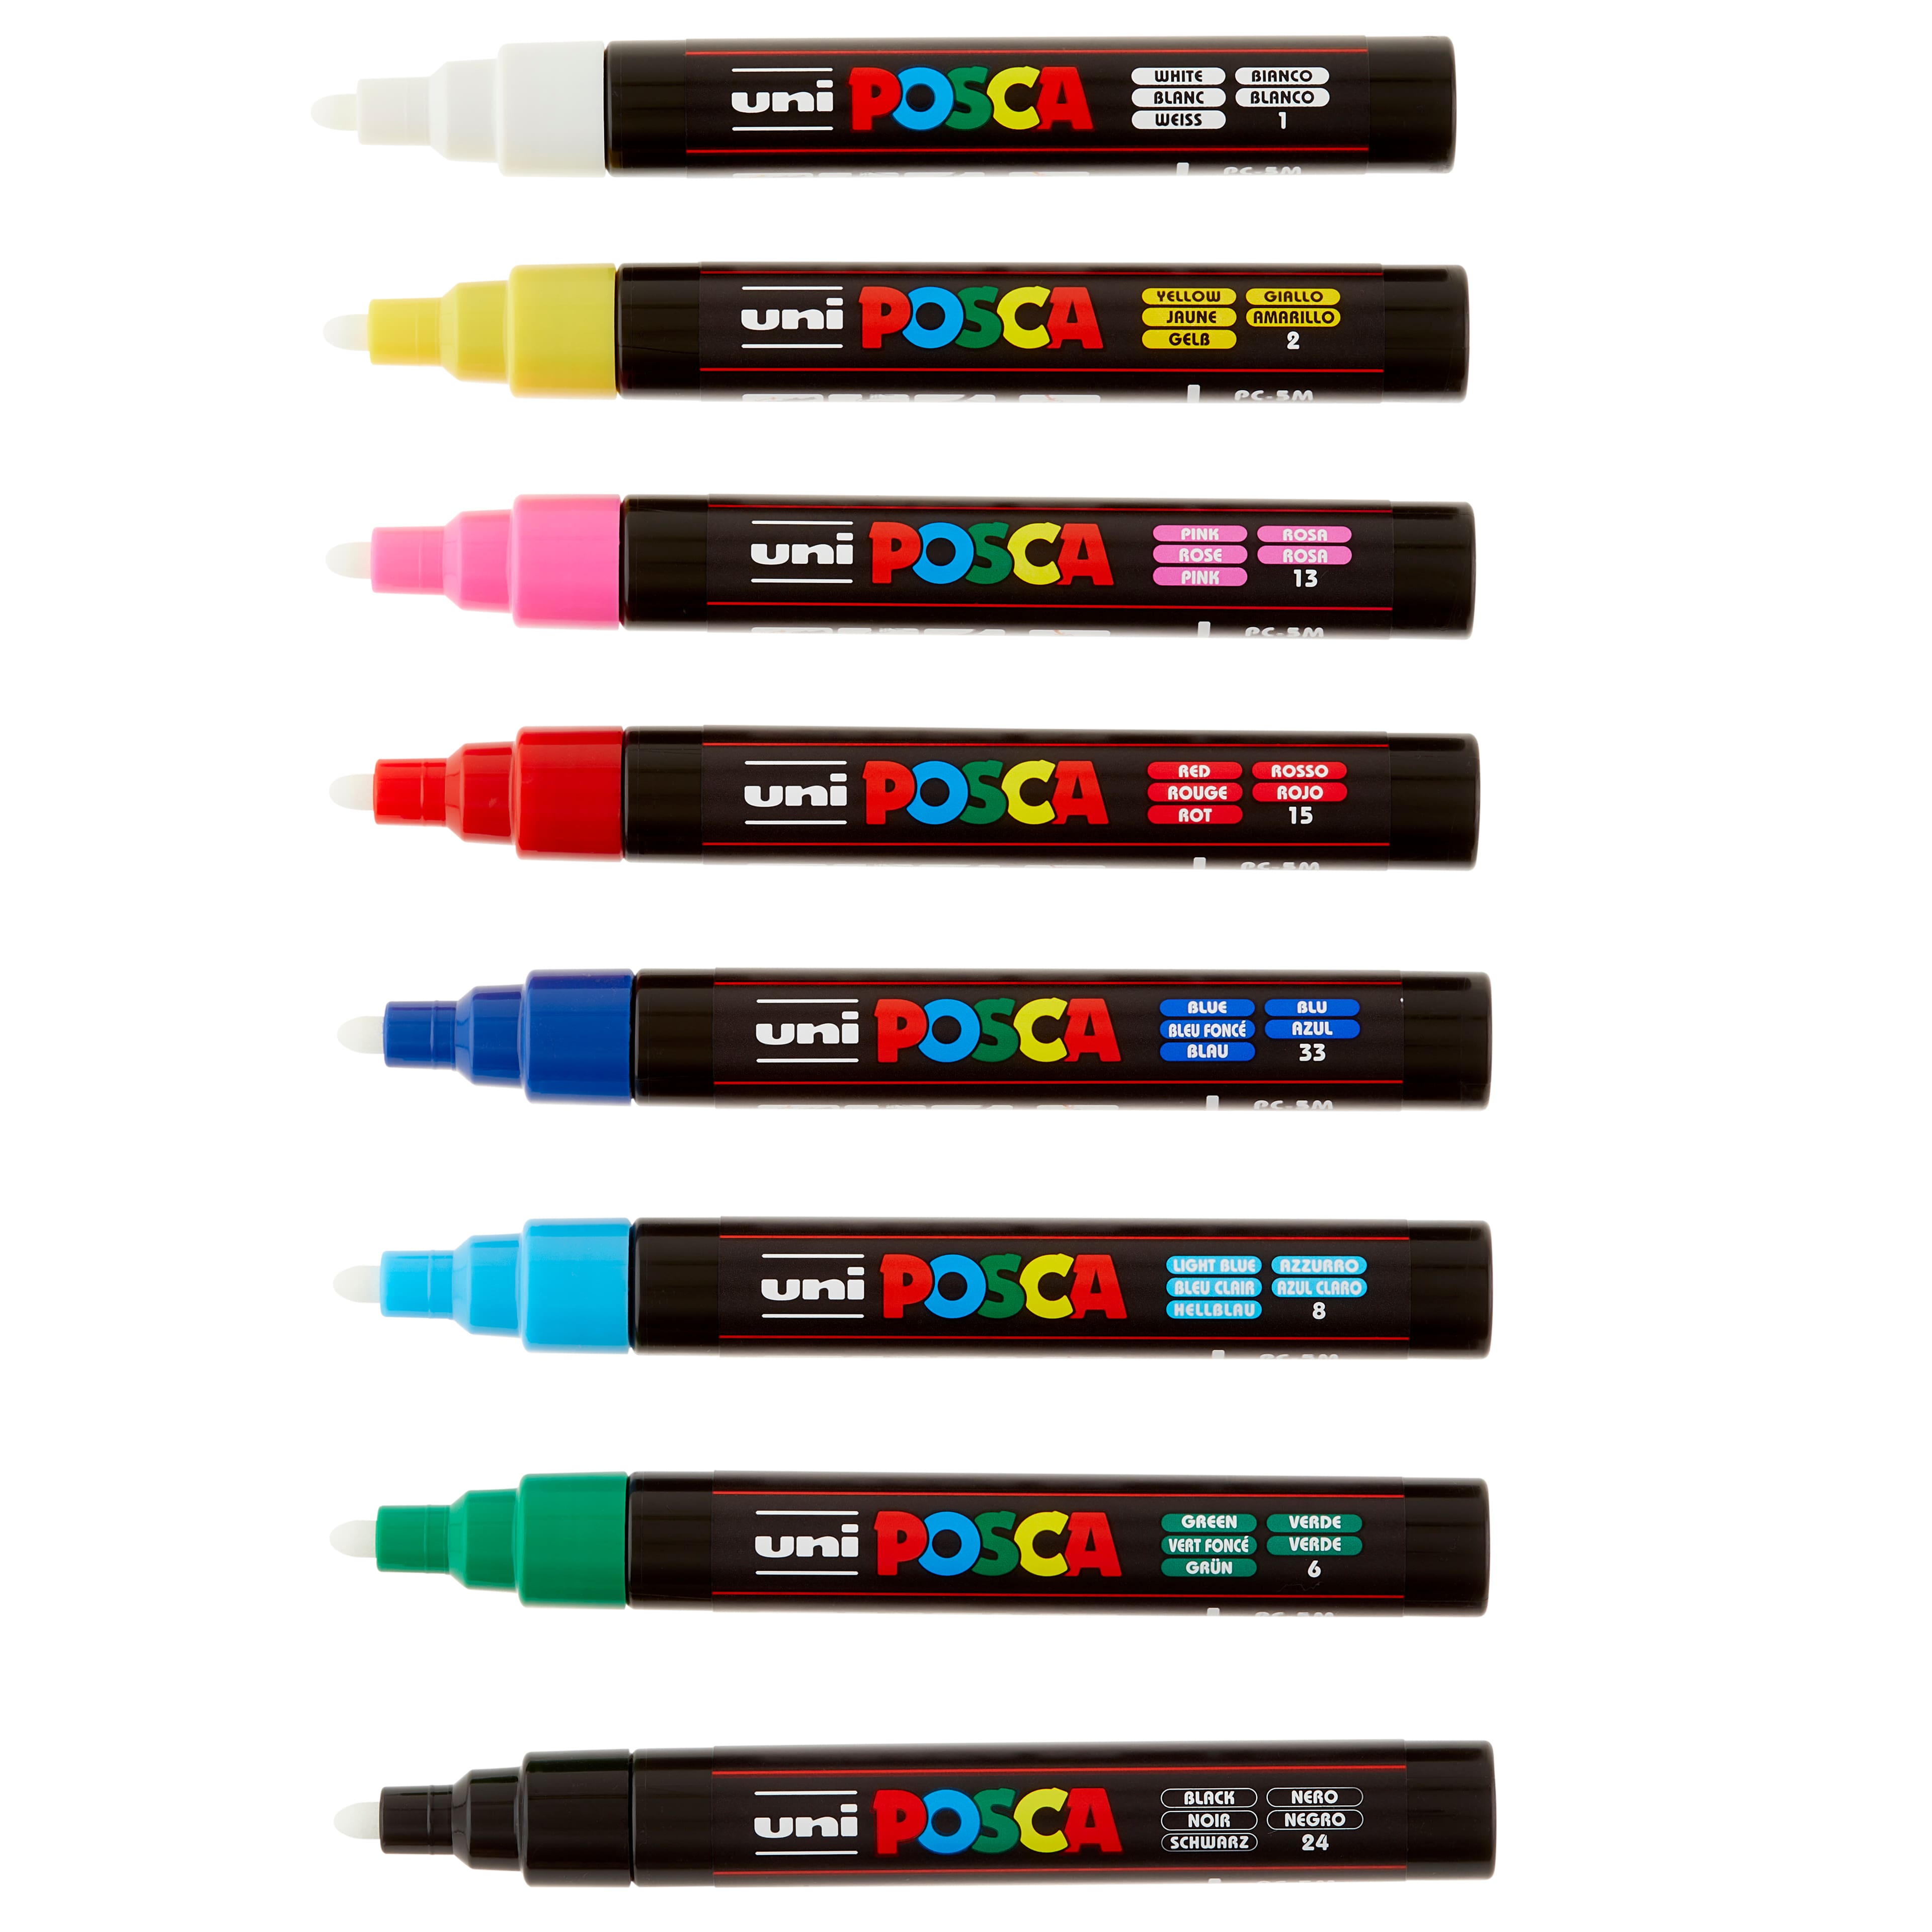 24 Posca Paint Markers, 3M Fine Posca Markers with Reversible Tips, Posca  Marker Set of Acrylic Paint Pens | Posca Pens for Art Supplies, Fabric